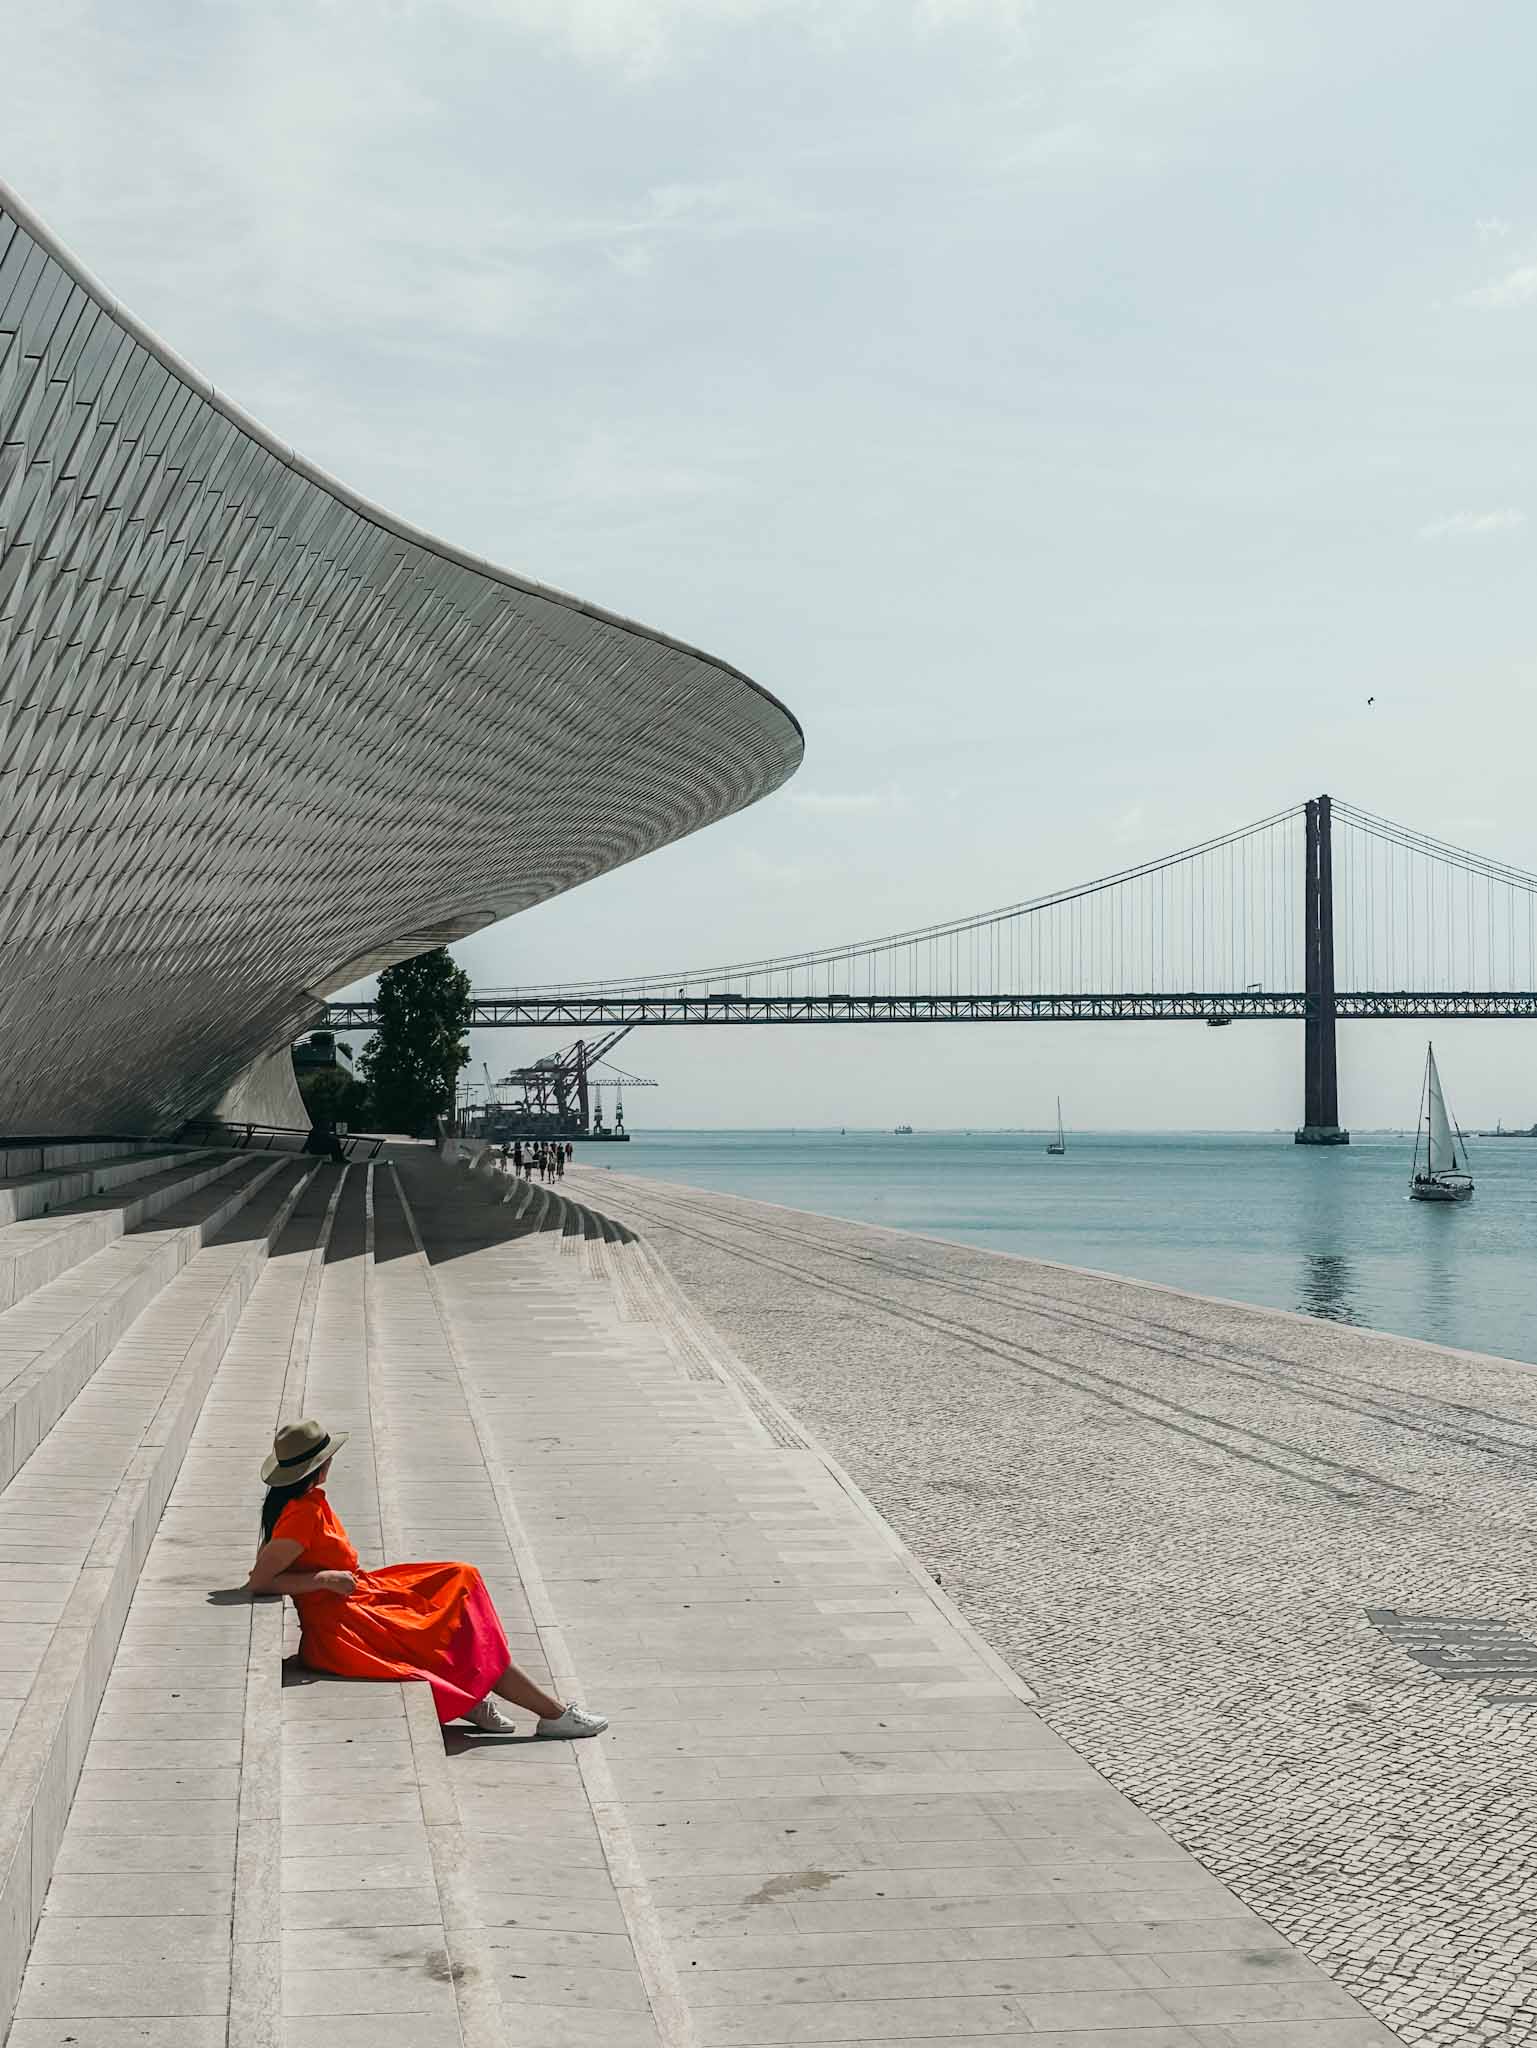 BMost beautiful places in Lisbon - MAAT - Museum of Art, Architecture and Technology